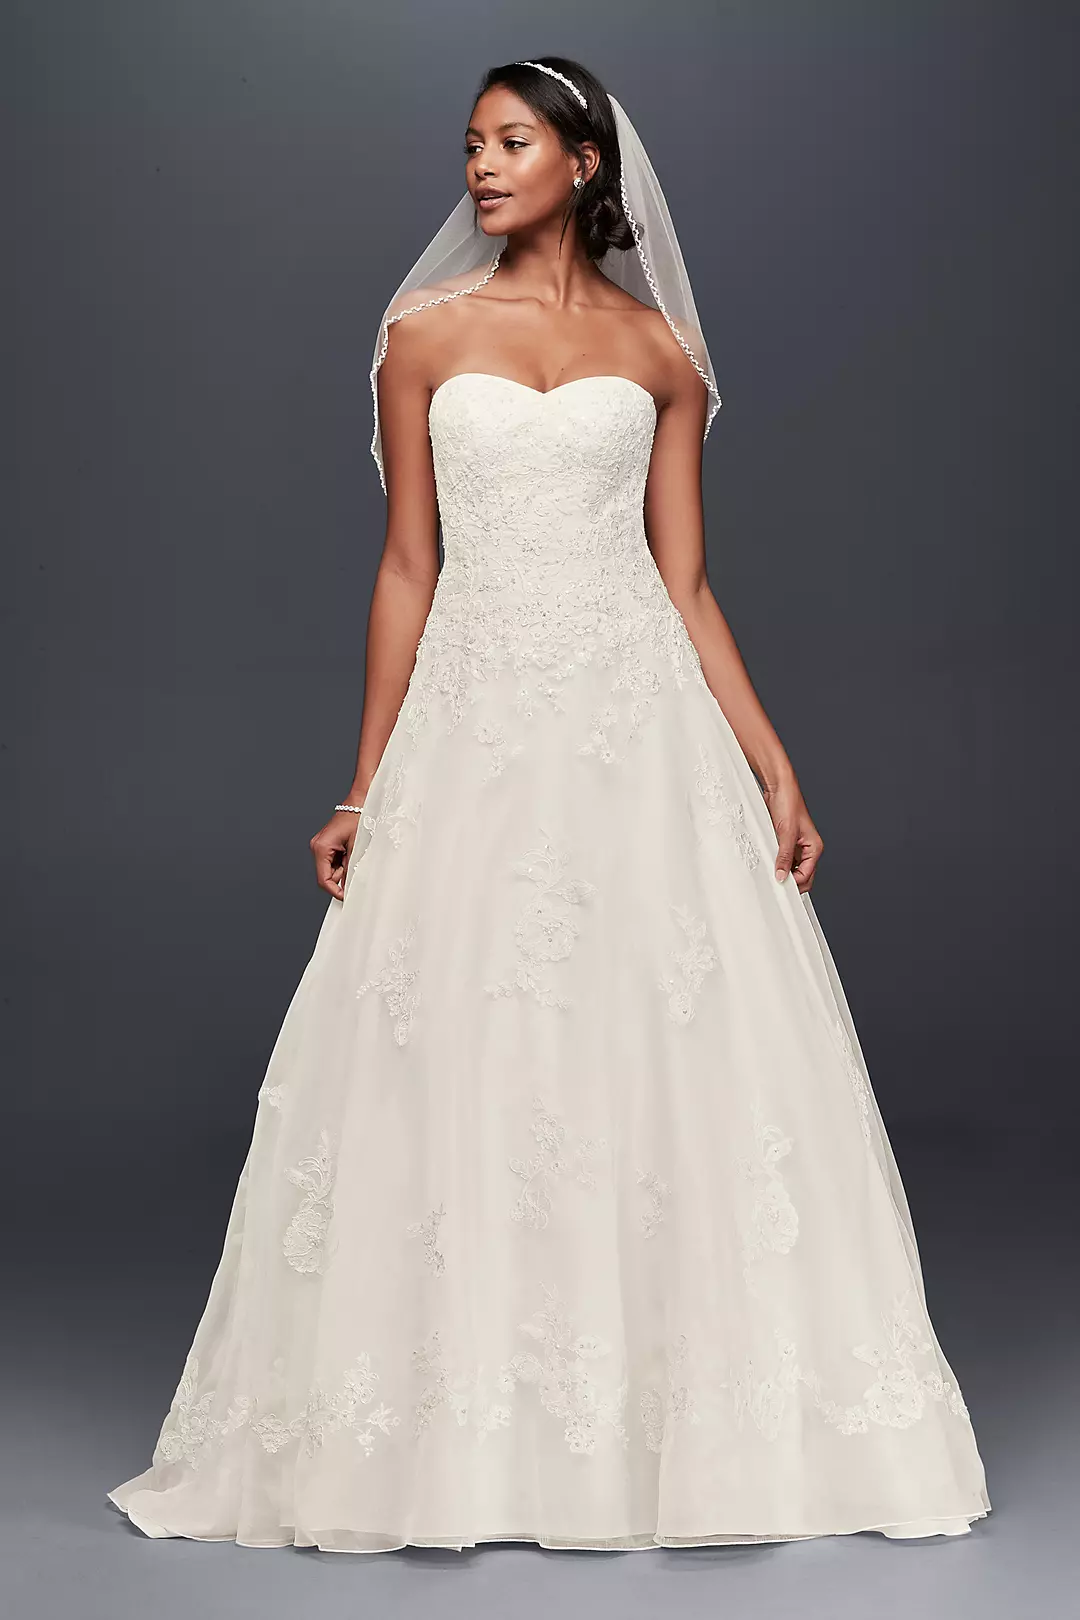 Organza A-Line Wedding Dress with Beaded Appliques Image